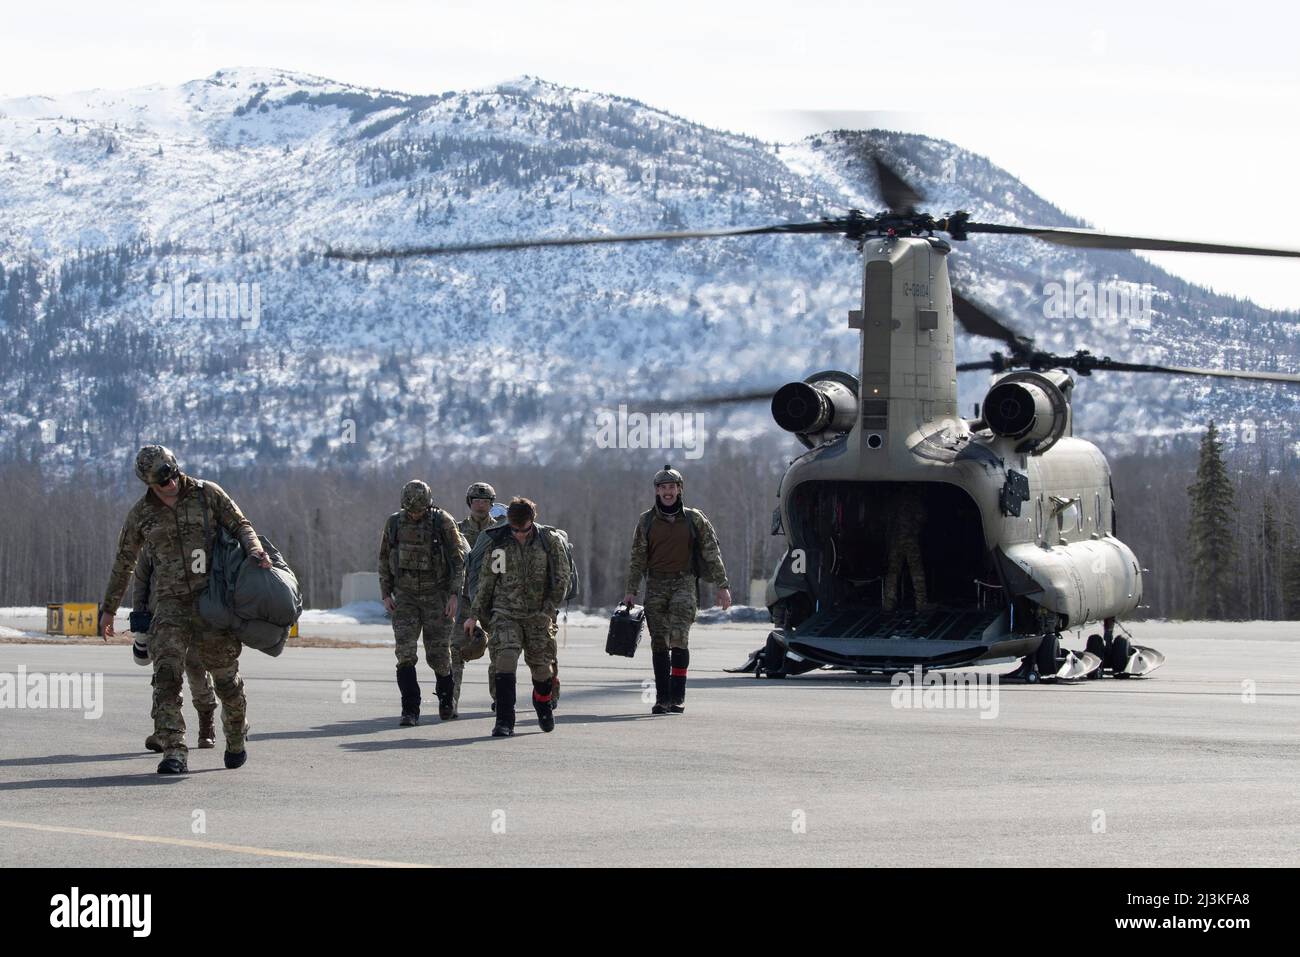 U.S. Airmen assigned to Detachment 1, 3rd Air Support Operations Squadron, and U.S. Soldiers assigned to 17th Combat Sustainment Support Battalion, U.S. Army Alaska, disembark a U.S. Army CH-47 Chinook helicopter assigned to B Company, 2-211th General Support Aviation Battalion, Alaska Army National Guard, while completing airborne operations at Joint Base Elmendorf-Richardson, Alaska, April 7, 2022. The 3rd ASOS completed the helicopter jump on Geronimo Drop Zone, maximizing total-force training to demonstrate short-notice mission readiness in an arctic environment. (U.S. Air Force photo by S Stock Photo